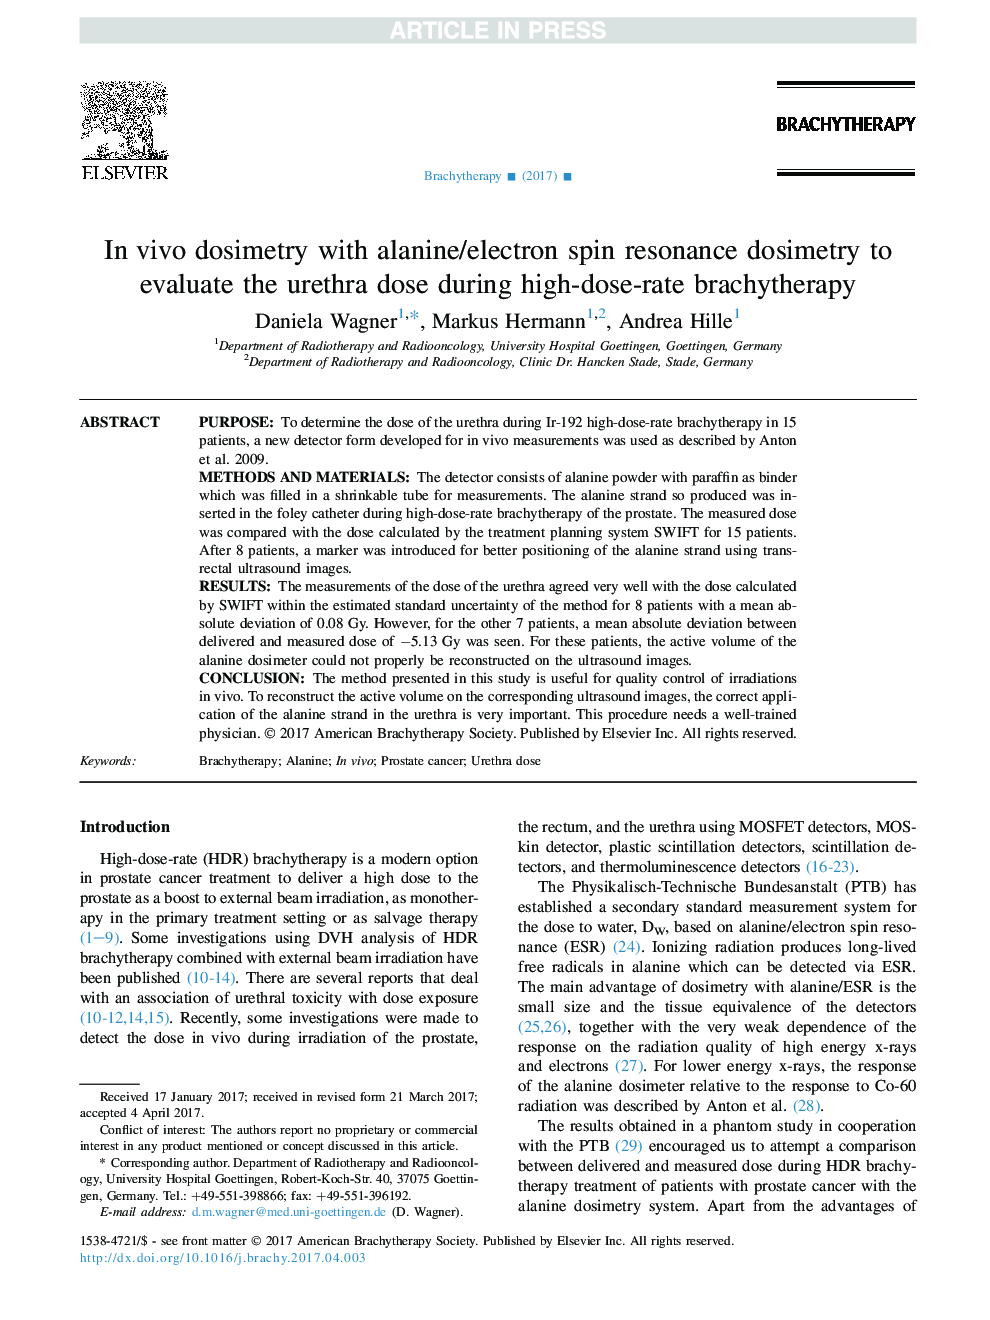 InÂ vivo dosimetry with alanine/electron spin resonance dosimetry to evaluate the urethra dose during high-dose-rate brachytherapy